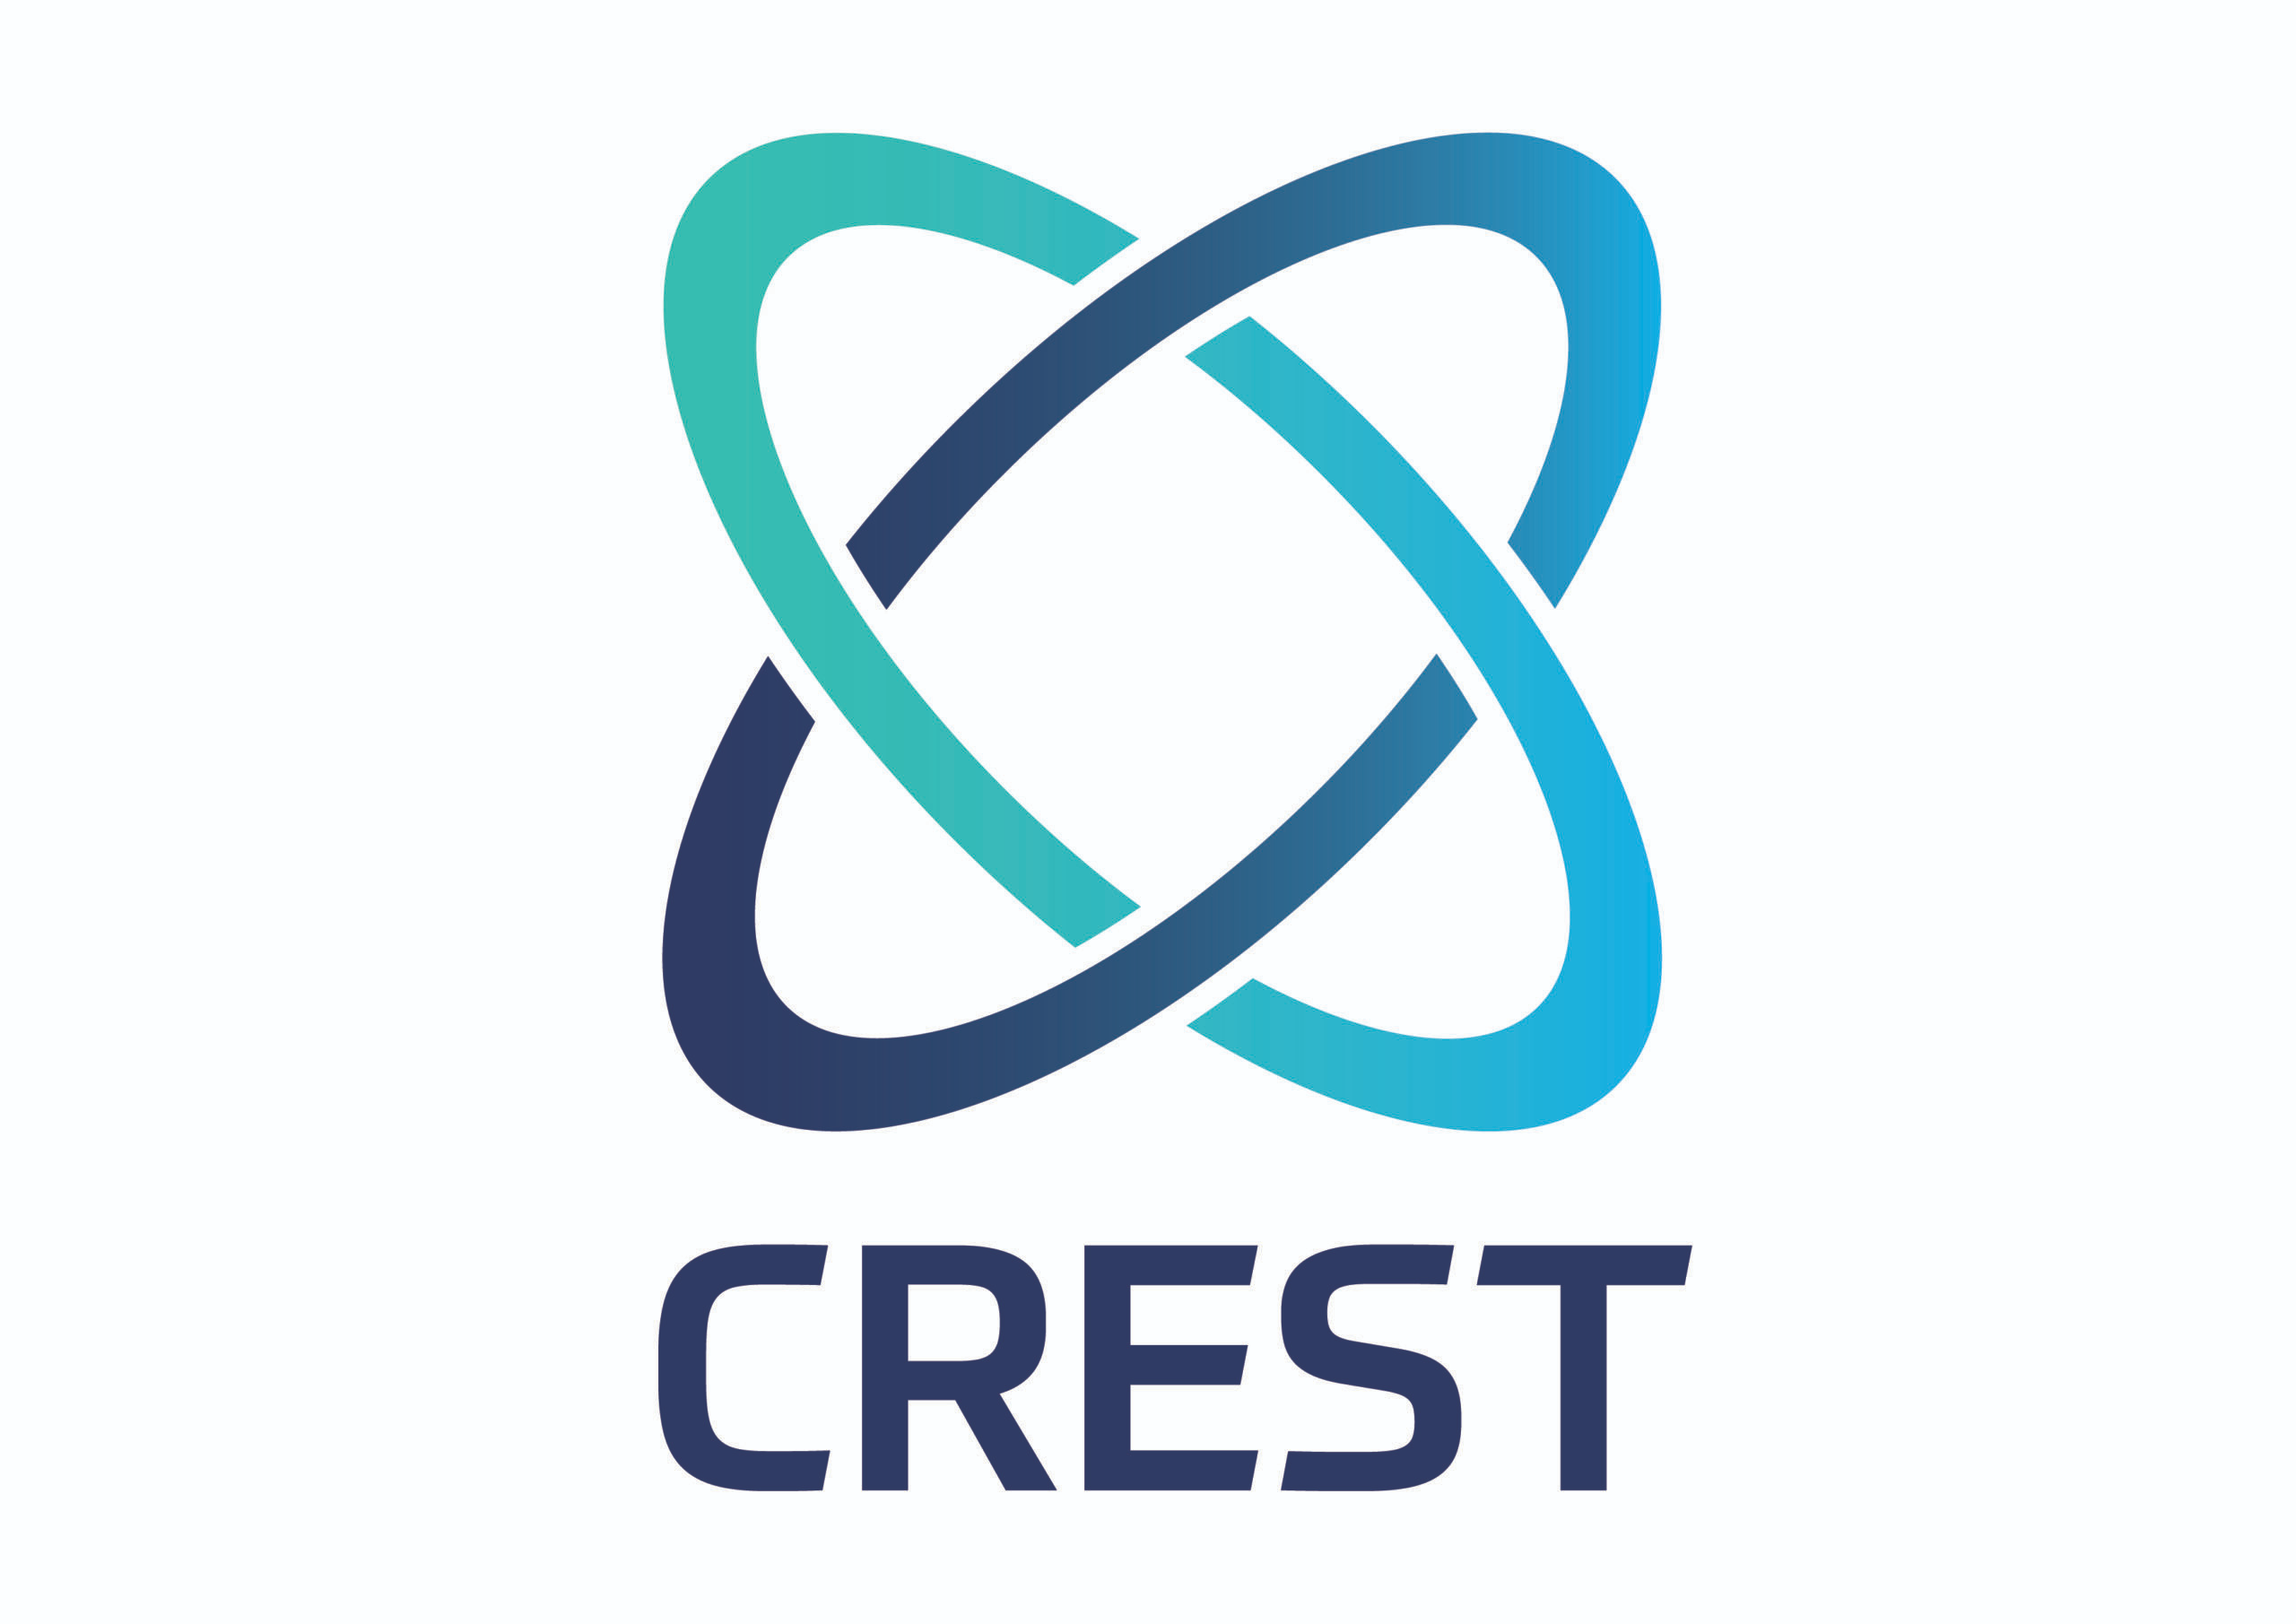 A logo of CREST company